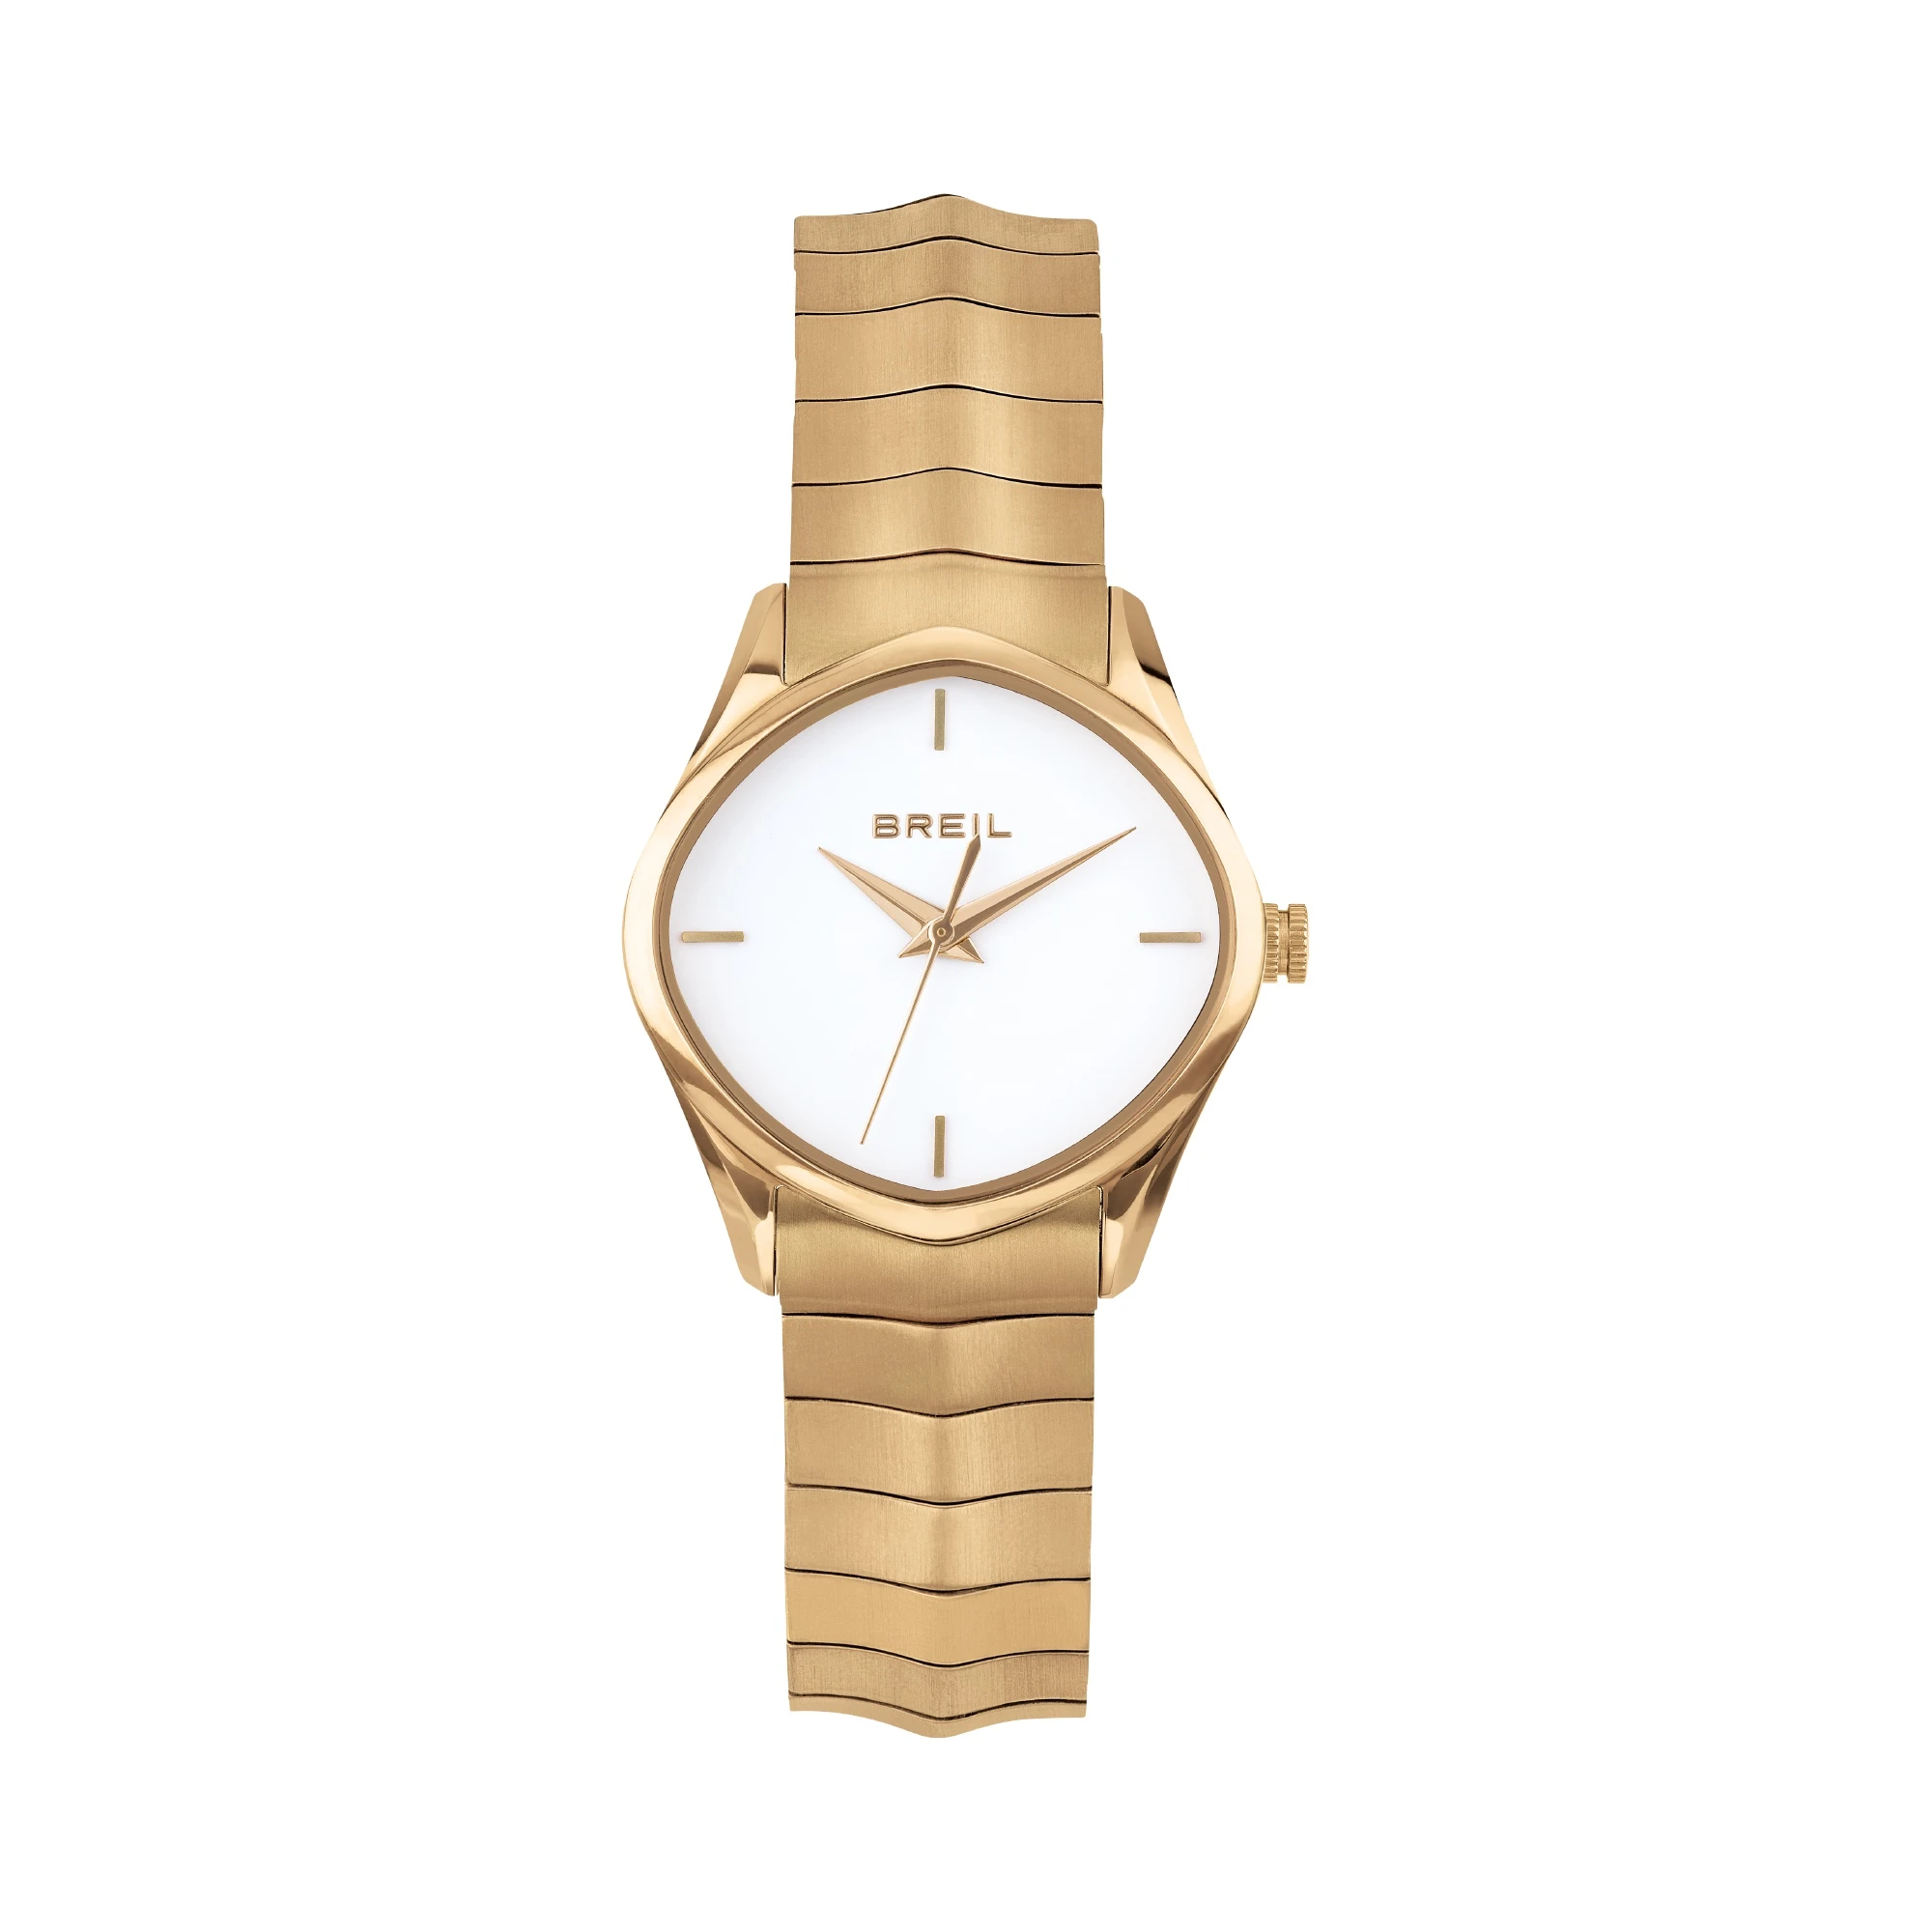 SINUOUS WATCHES - 3H LADY 32x30MM - 1 - TW1905 | Breil